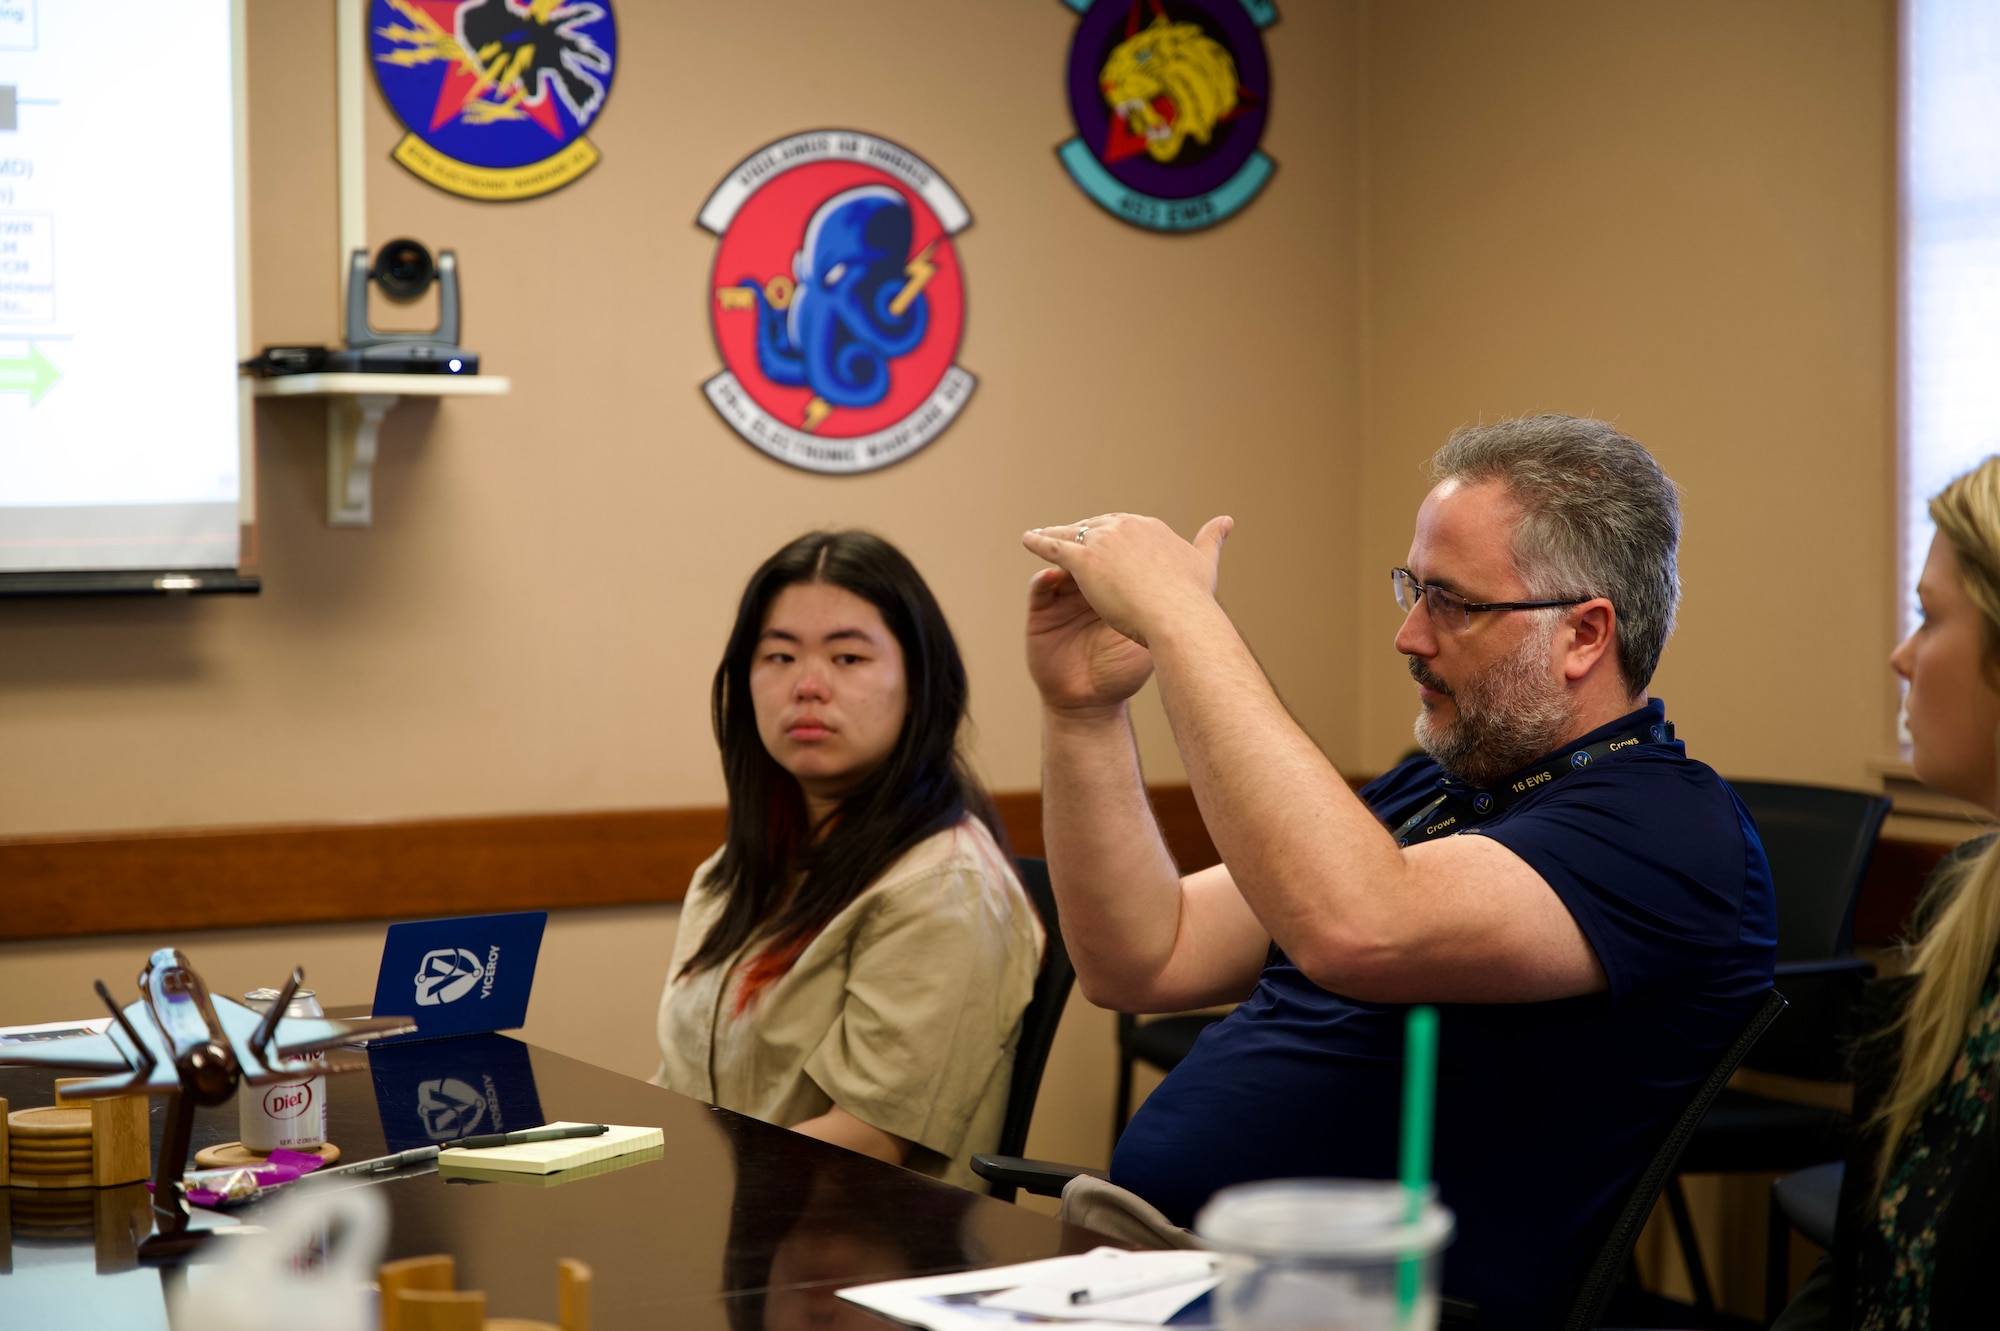 Michael Rafferty, 16th Electronic Warfare Squadron chief engineer, right, describes how mission data reprogramming works to a group of interns who will be interning at the 350th Spectrum Warfare Wing for the summer at Eglin Air Force Base, Fla., June 5, 2023. The Virtual Institutes for Cyber and
Electromagnetic Spectrum Research and Employ (VICEROY) Program allows for college students to work at DoD organizations to get hands on training and experience with critical missions to prepare them for a potential future career with the government. (U.S. Air Force photo by 1st Lt. Benjamin Aronson)